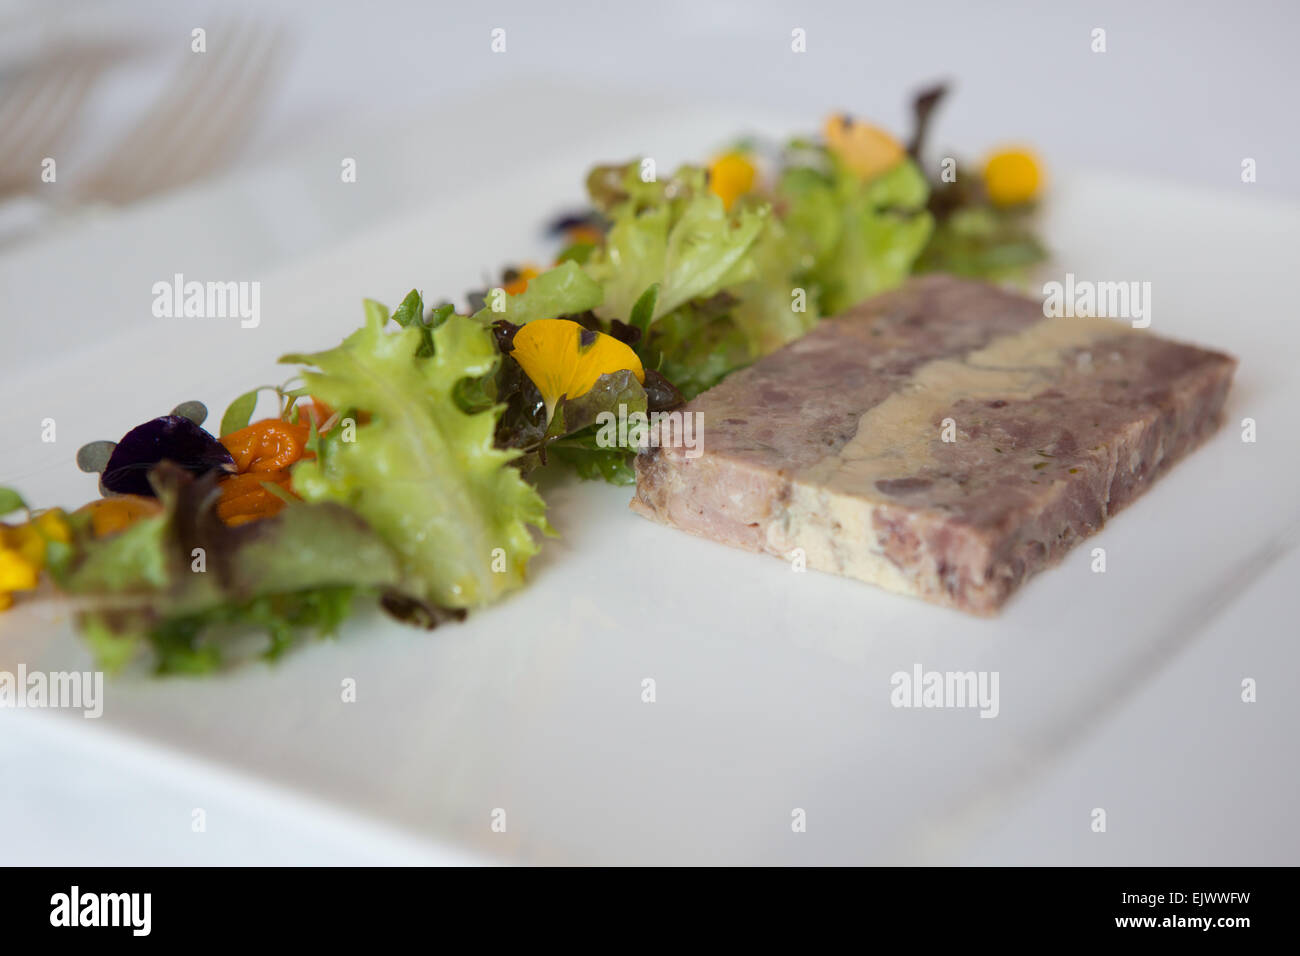 Smoked ham hock and foie gras terrine with home made piccalilli and salad garnish served on a white plate. Stock Photo